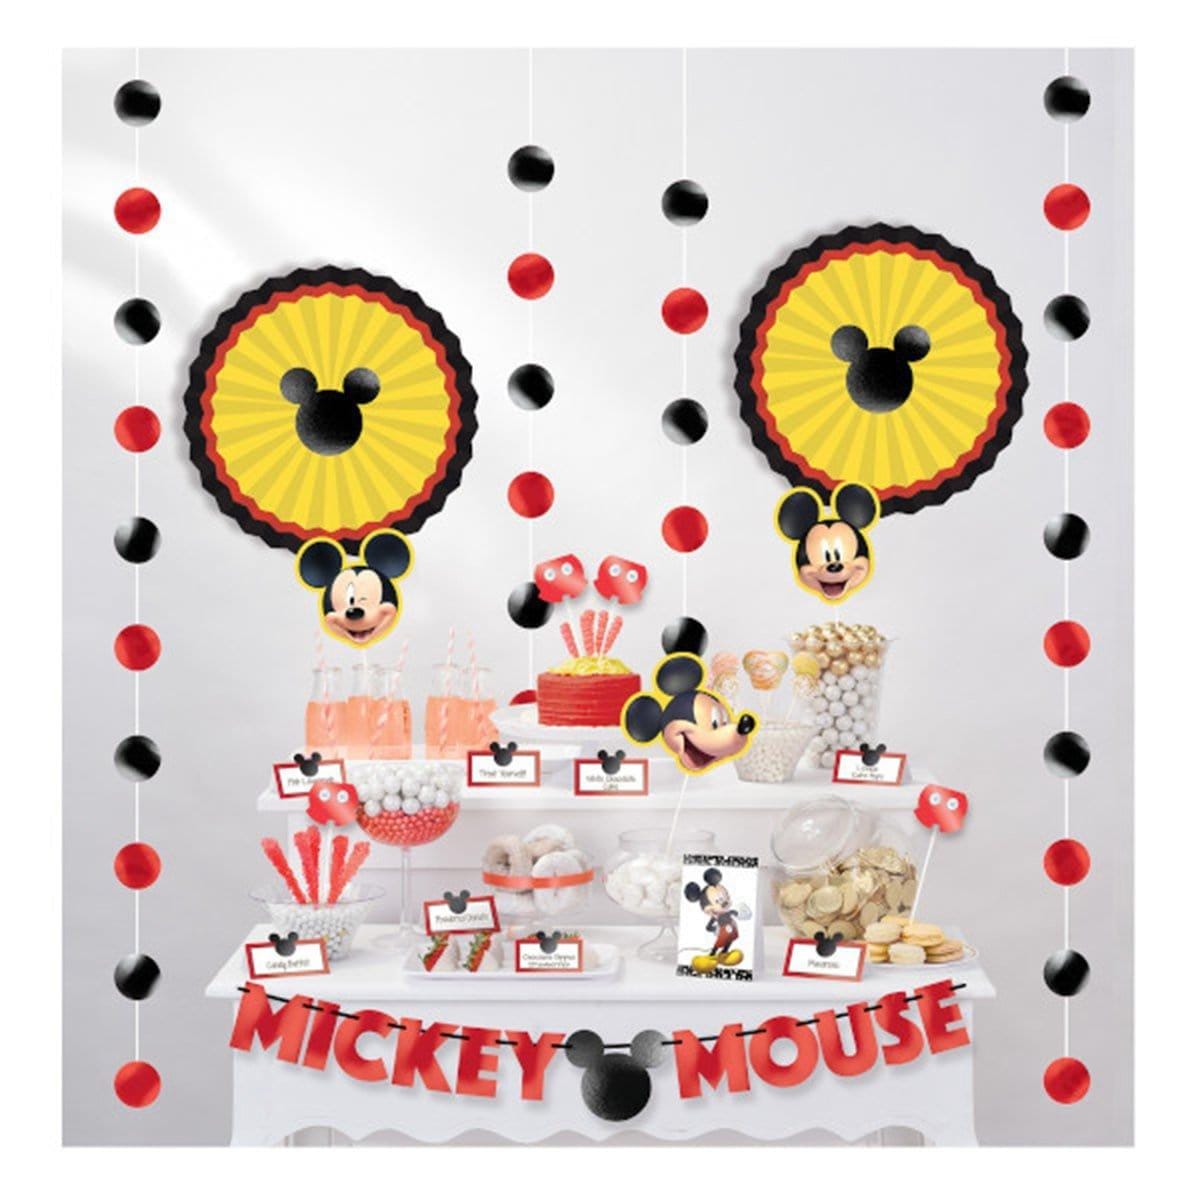 Buy Kids Birthday Mickey Mouse Forever buffet decorating kit sold at Party Expert